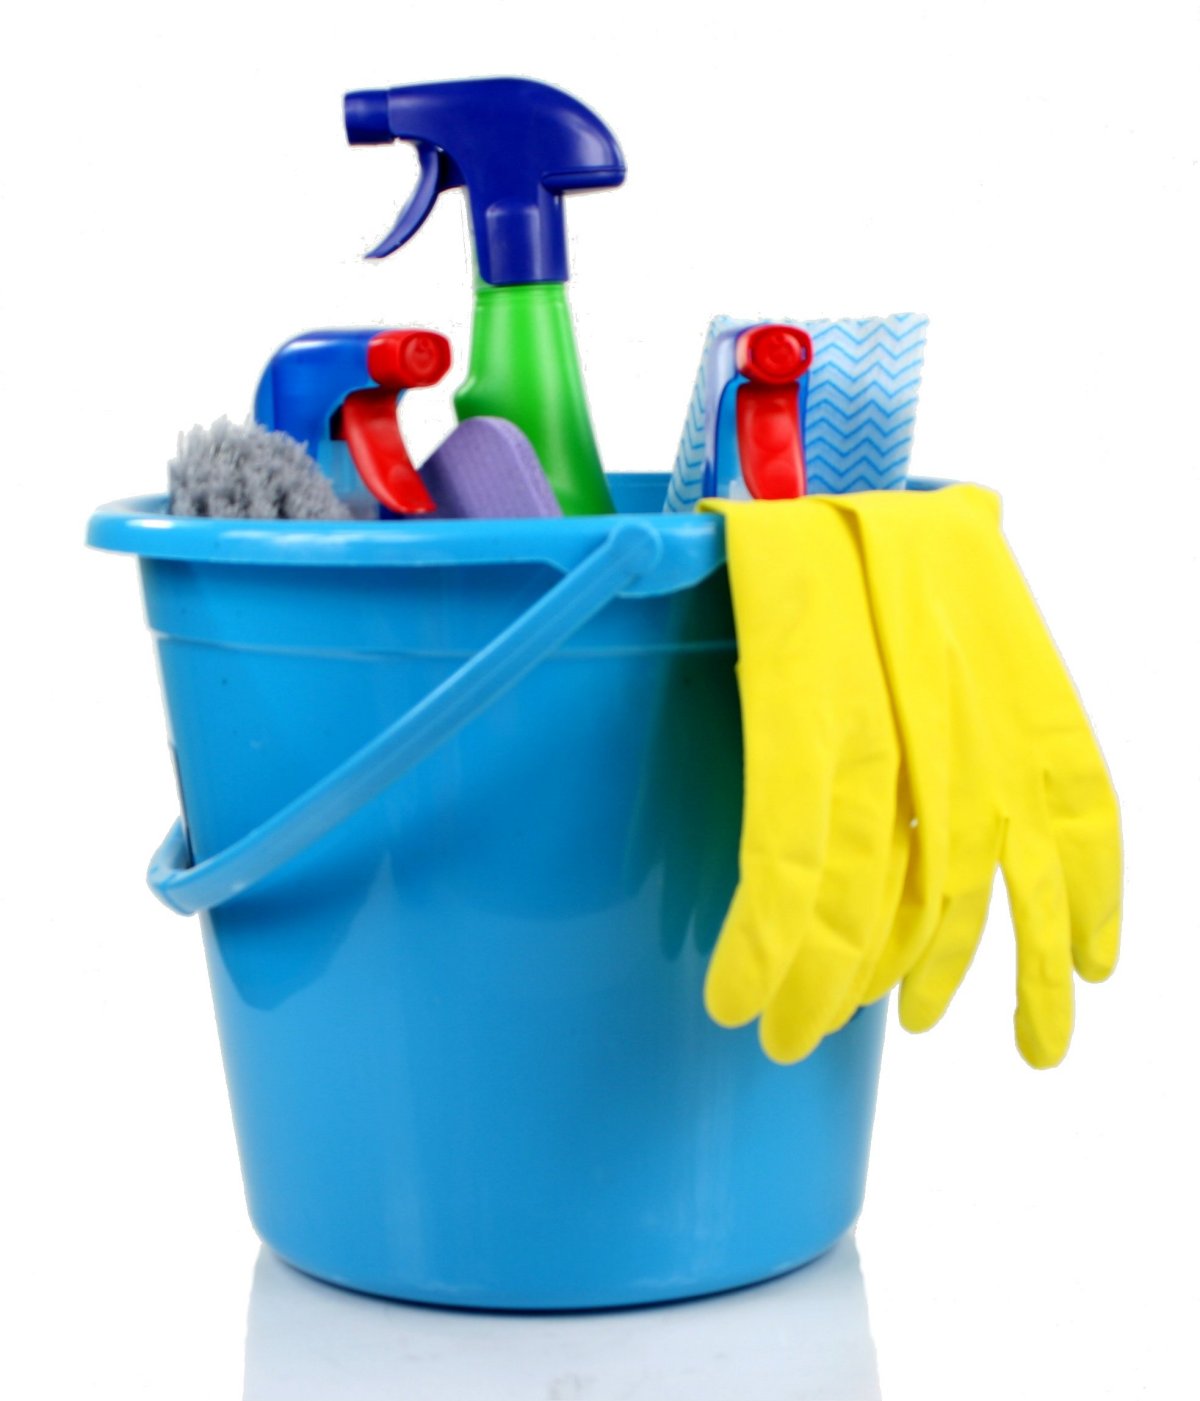 Blue bucket of cleaning supplies.